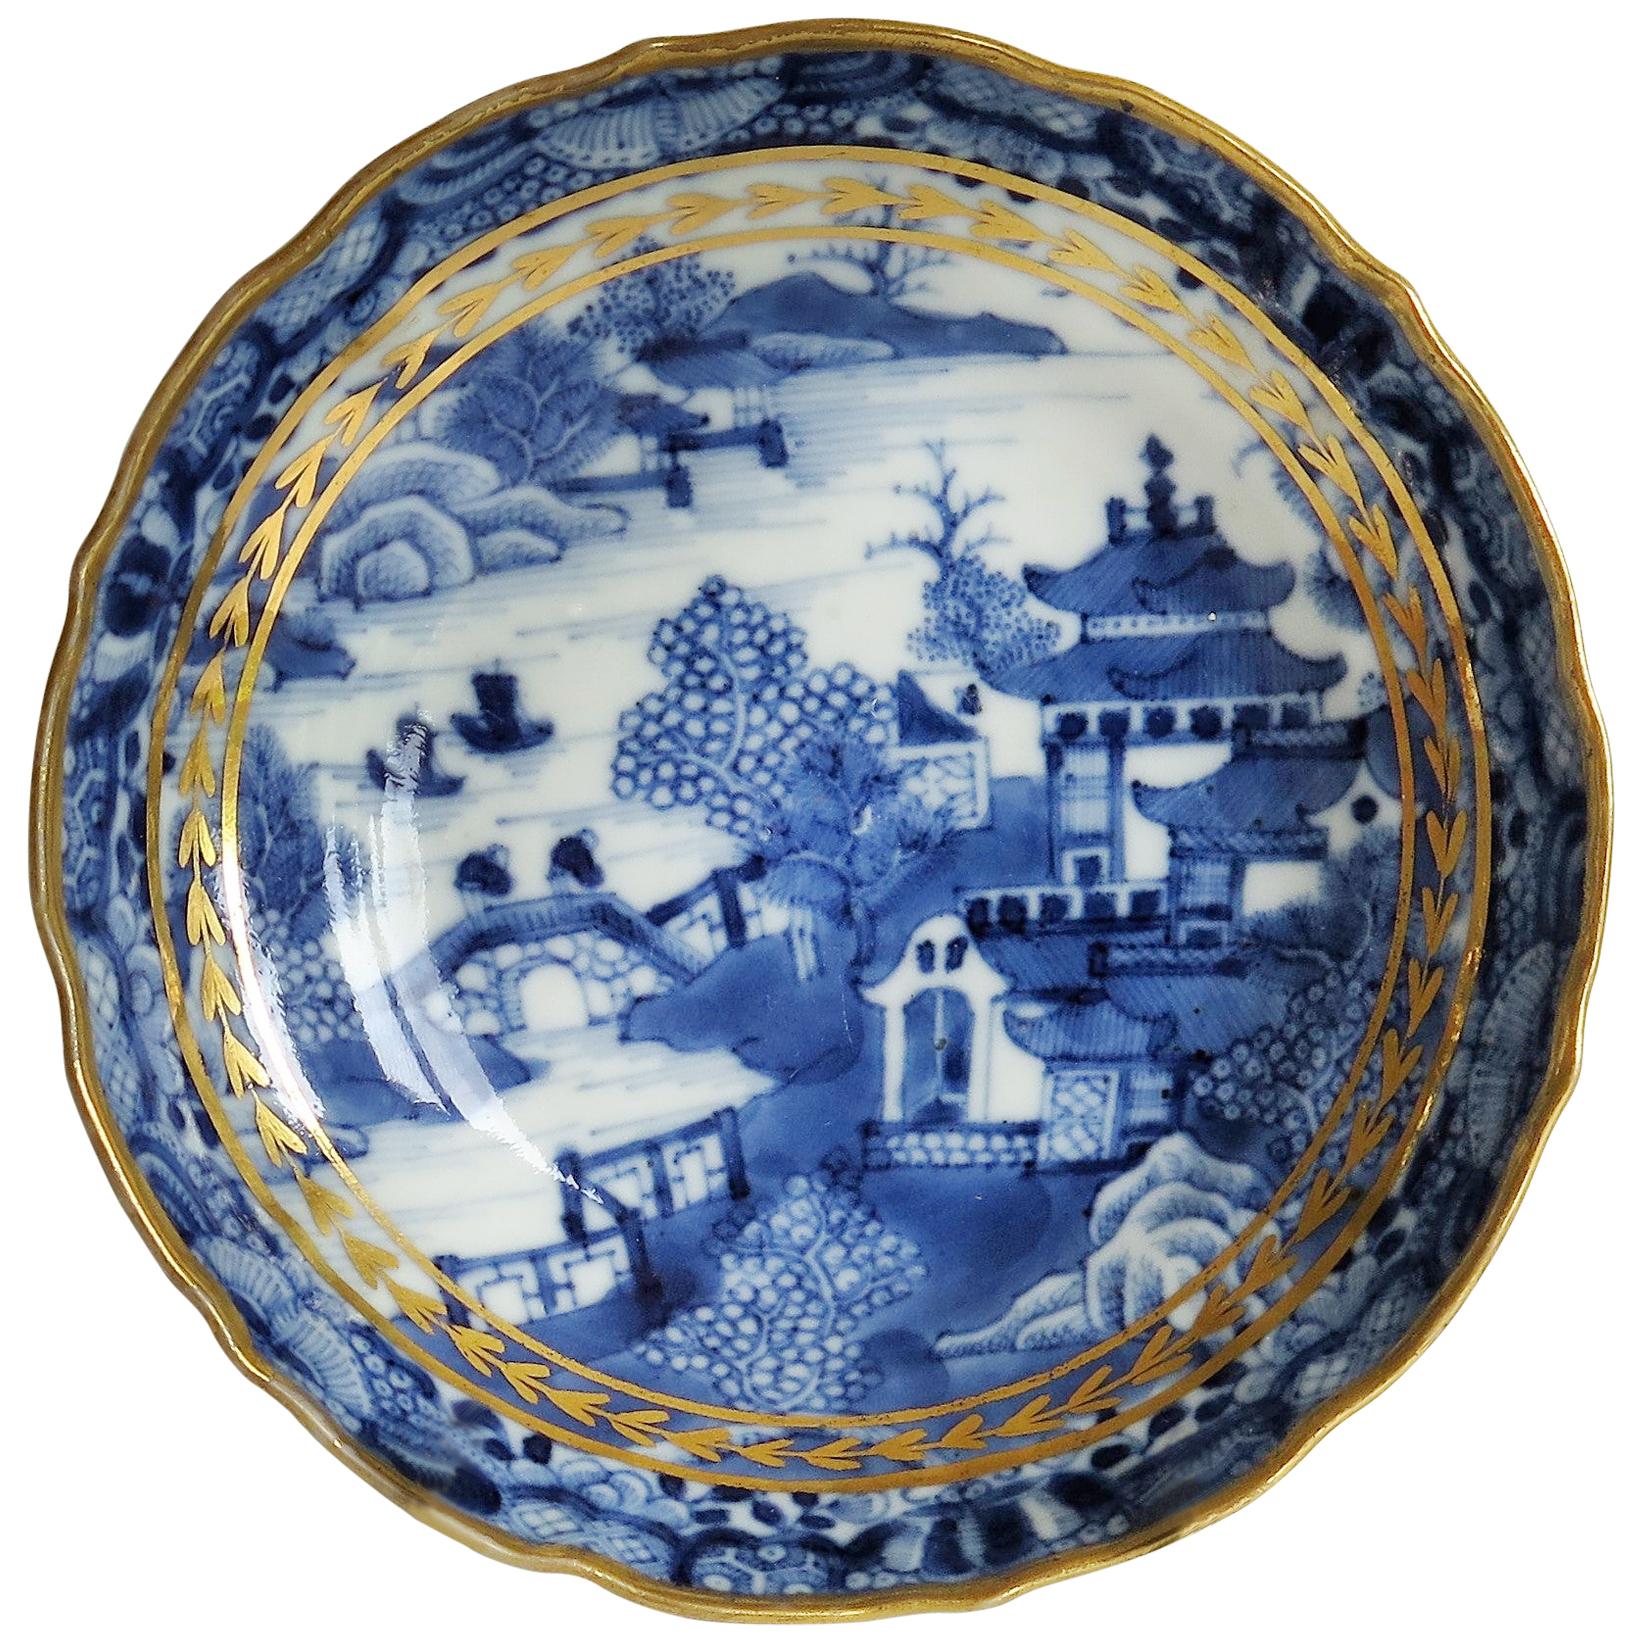 Chinese Export Porcelain Berry Bowl or Dish Blue and White Gilded, Qing